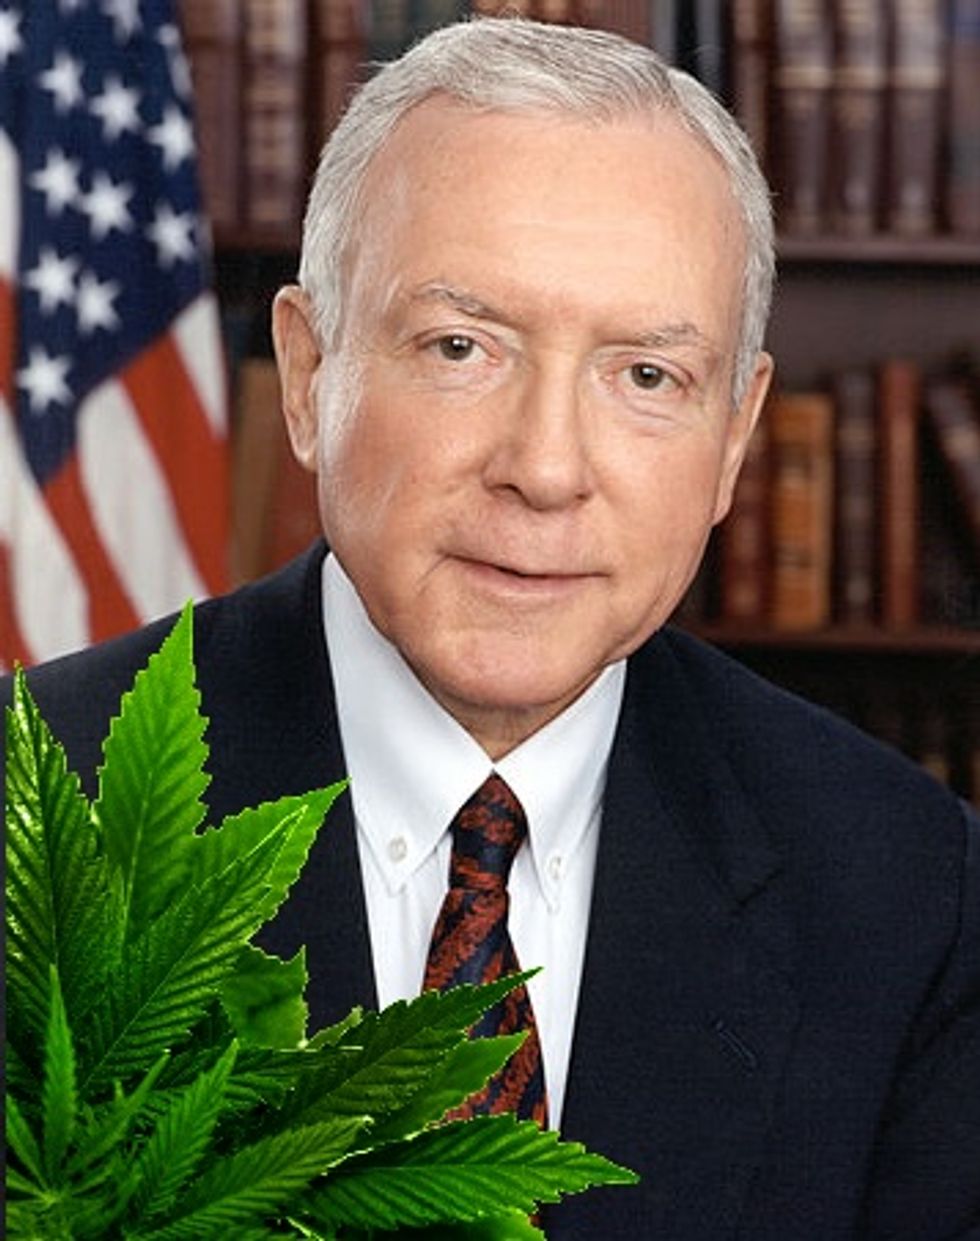 Orrin Hatch Steals All The Dad Puns With Medical Pot Research Bill Announcement